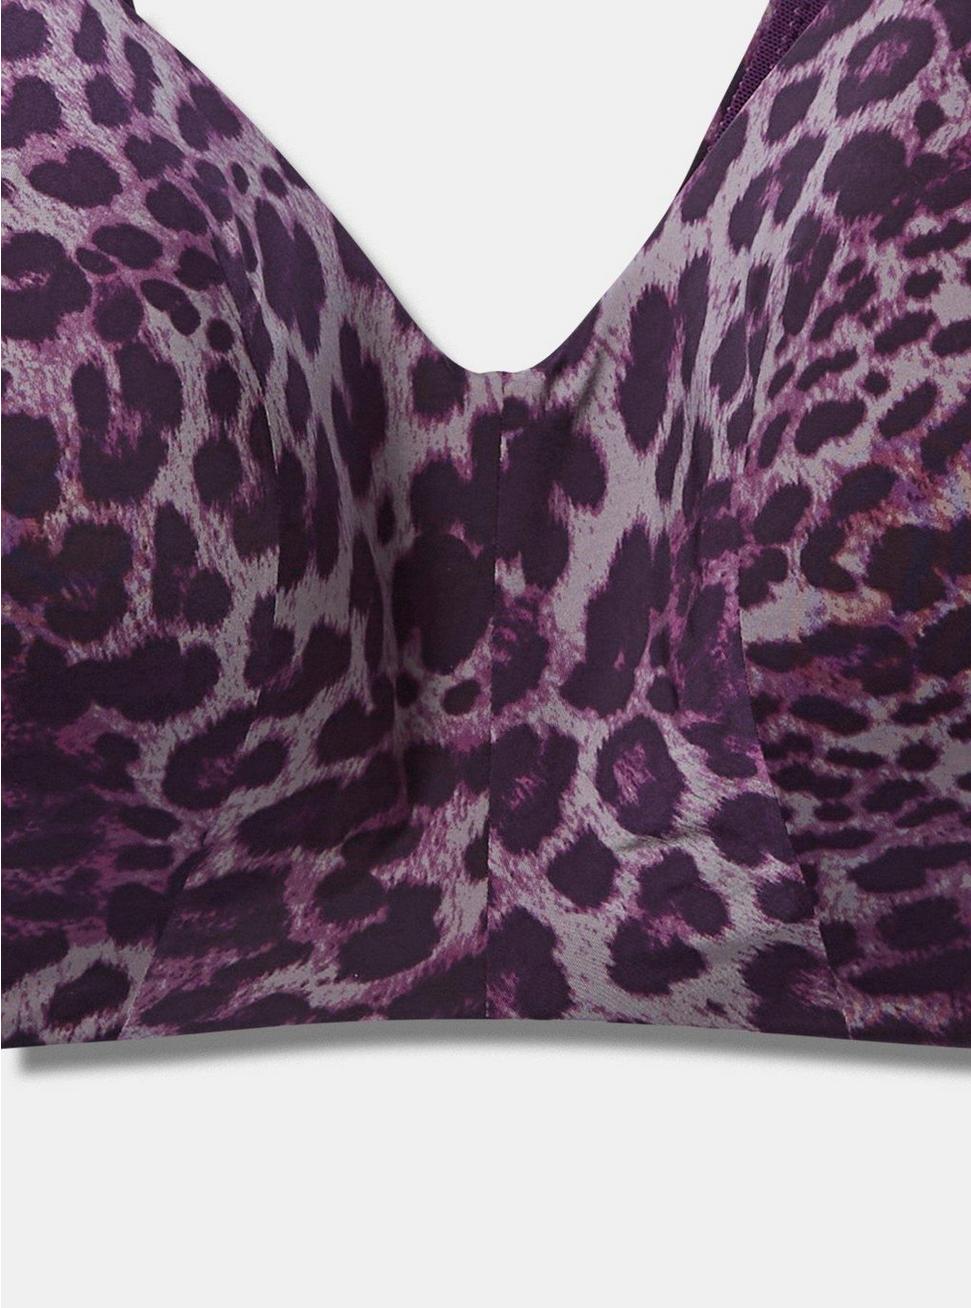 Everyday Wire-Free Lightly Lined Print 360° Back Smoothing® Bra, CLASSIC LEOPARD GRAPE ROYALE, alternate